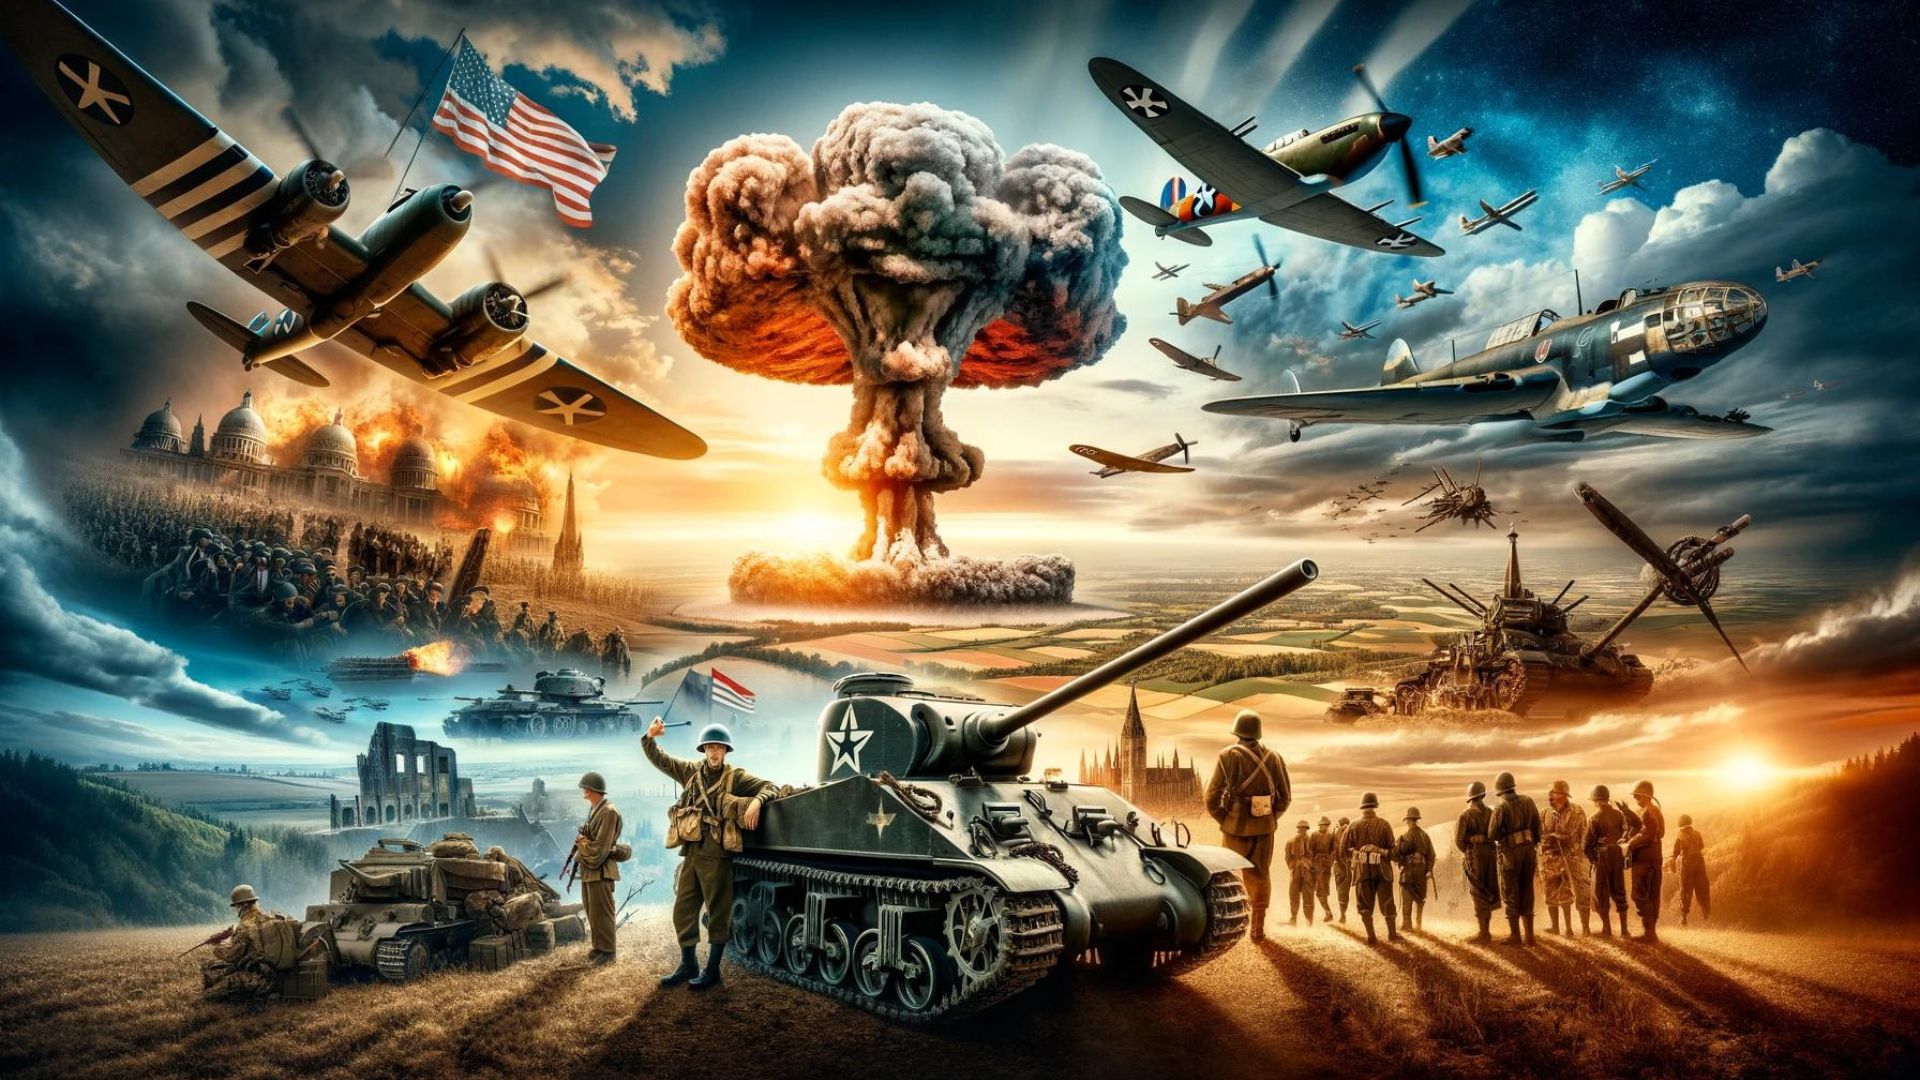 The Impact and Key Events of World War II